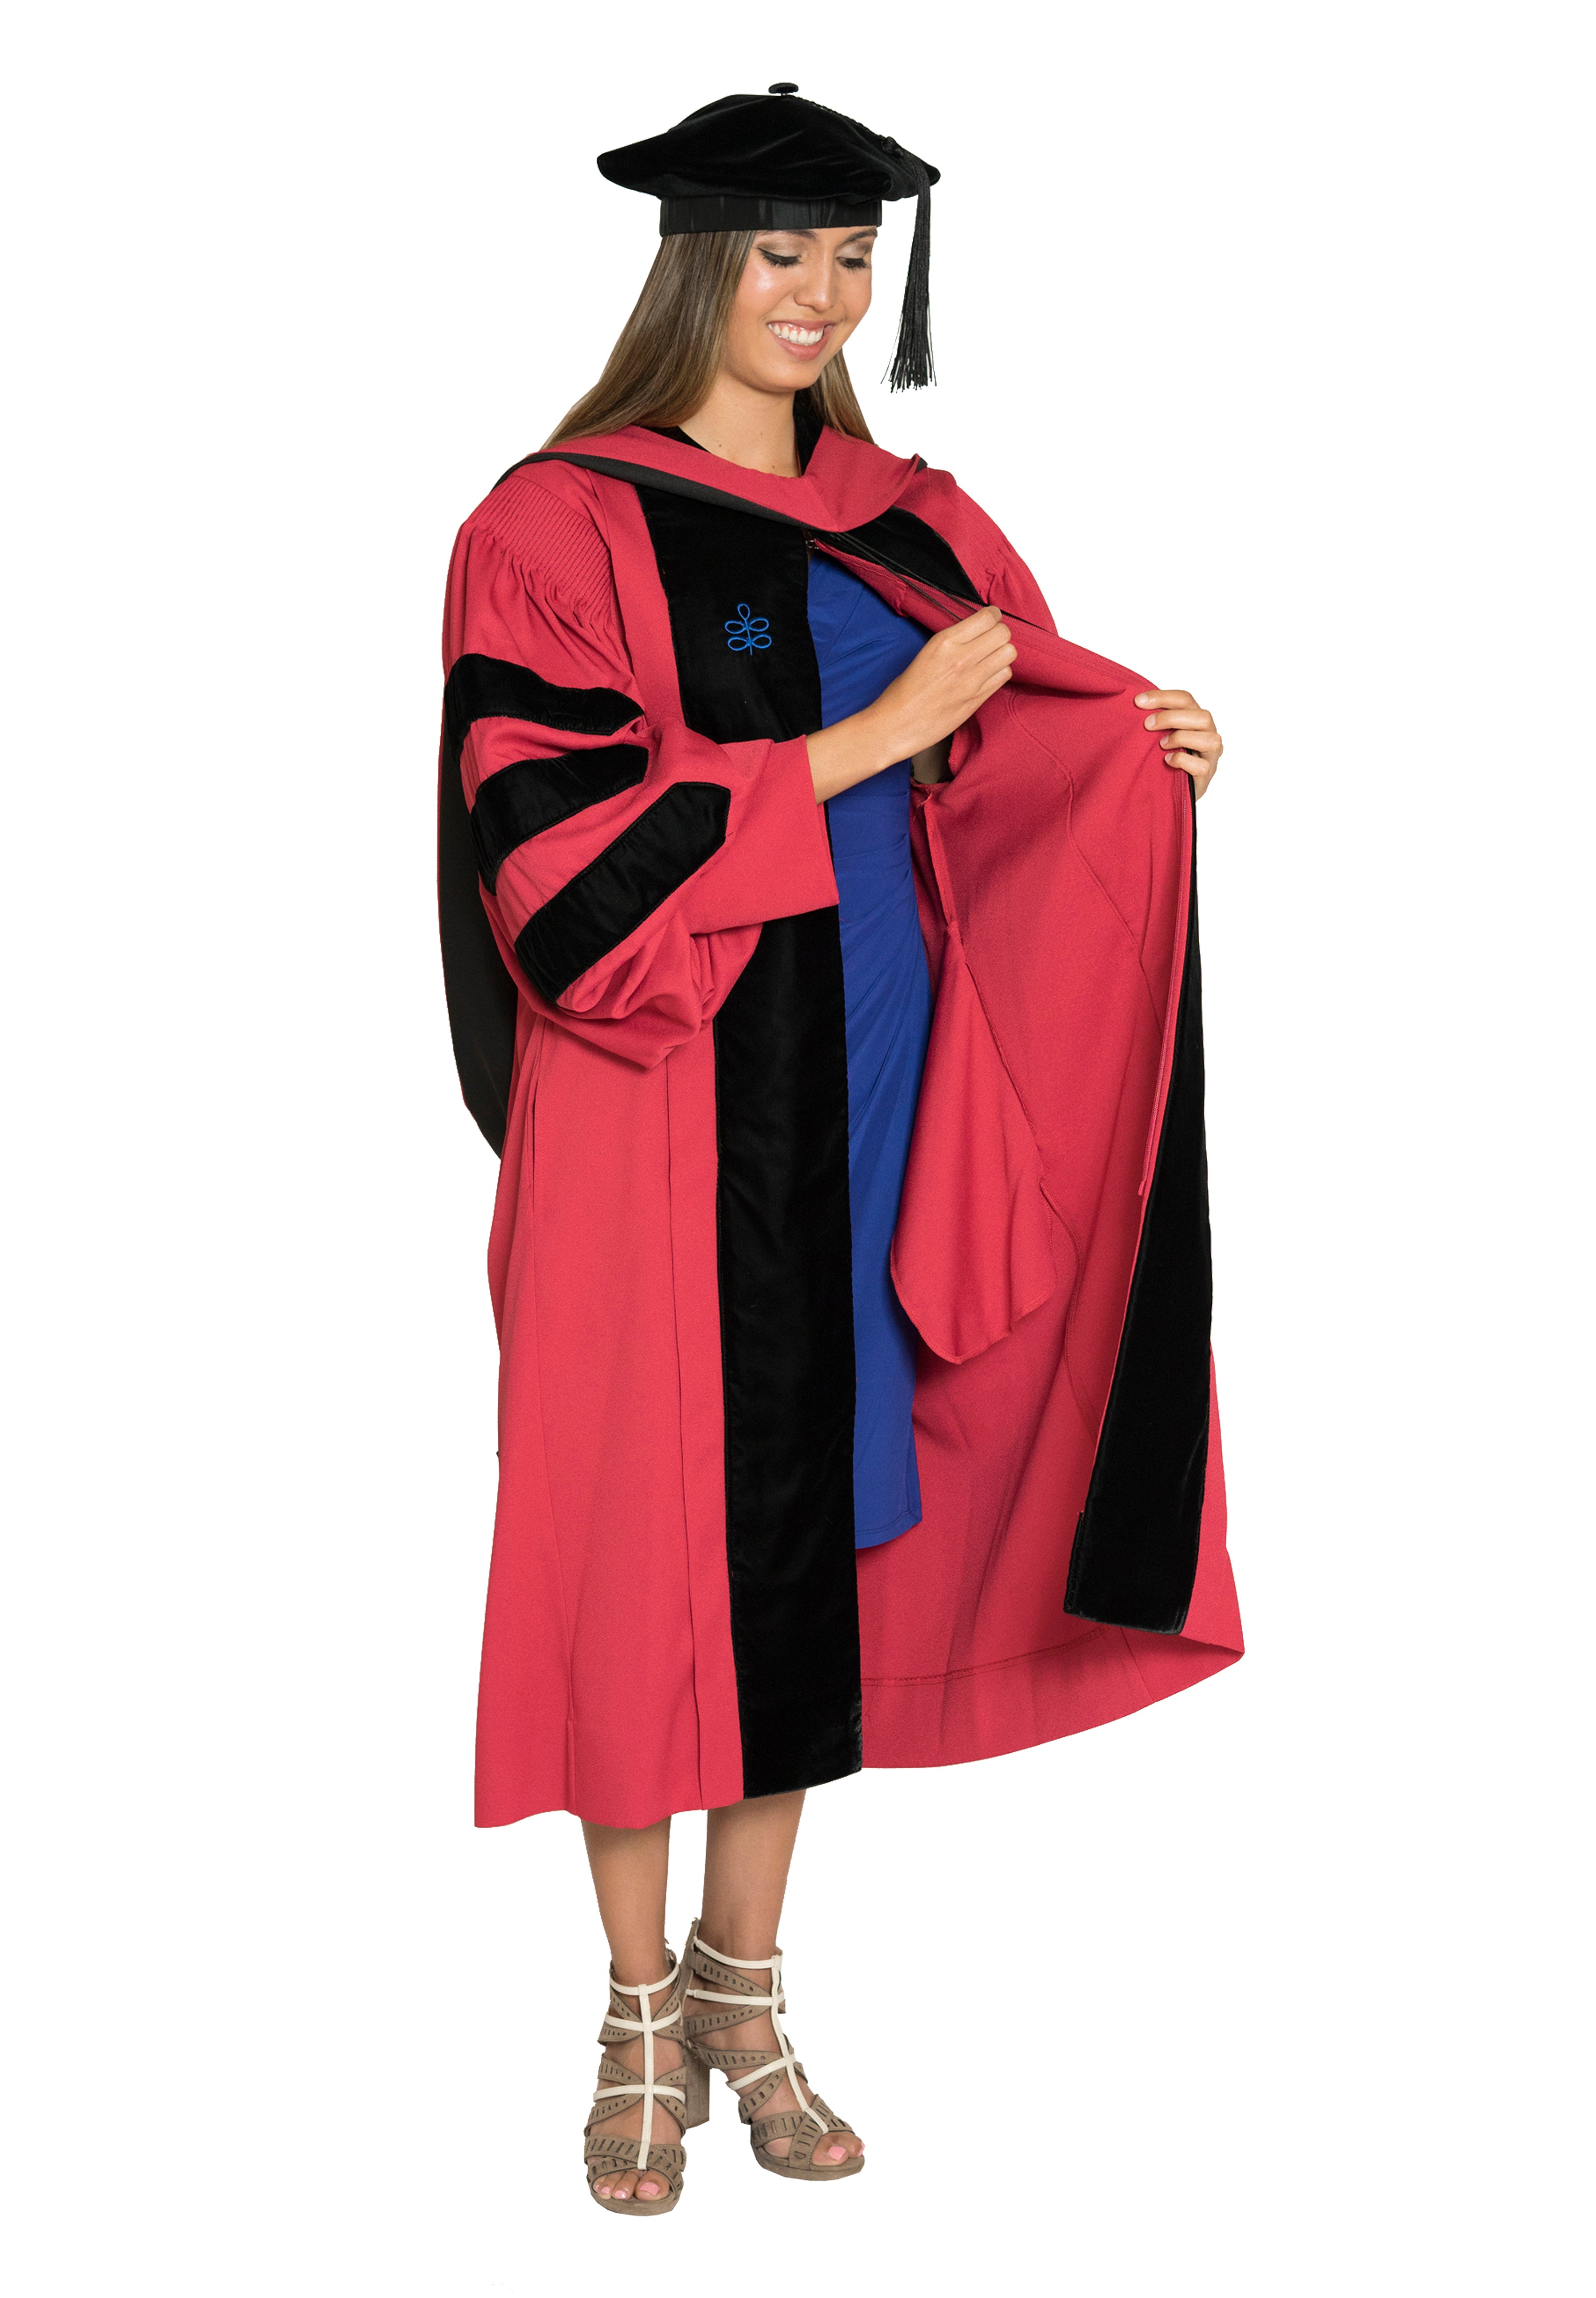 Cappe Diem Doctoral Gowns with Gold Piping and Tam Deluxe Package | eBay